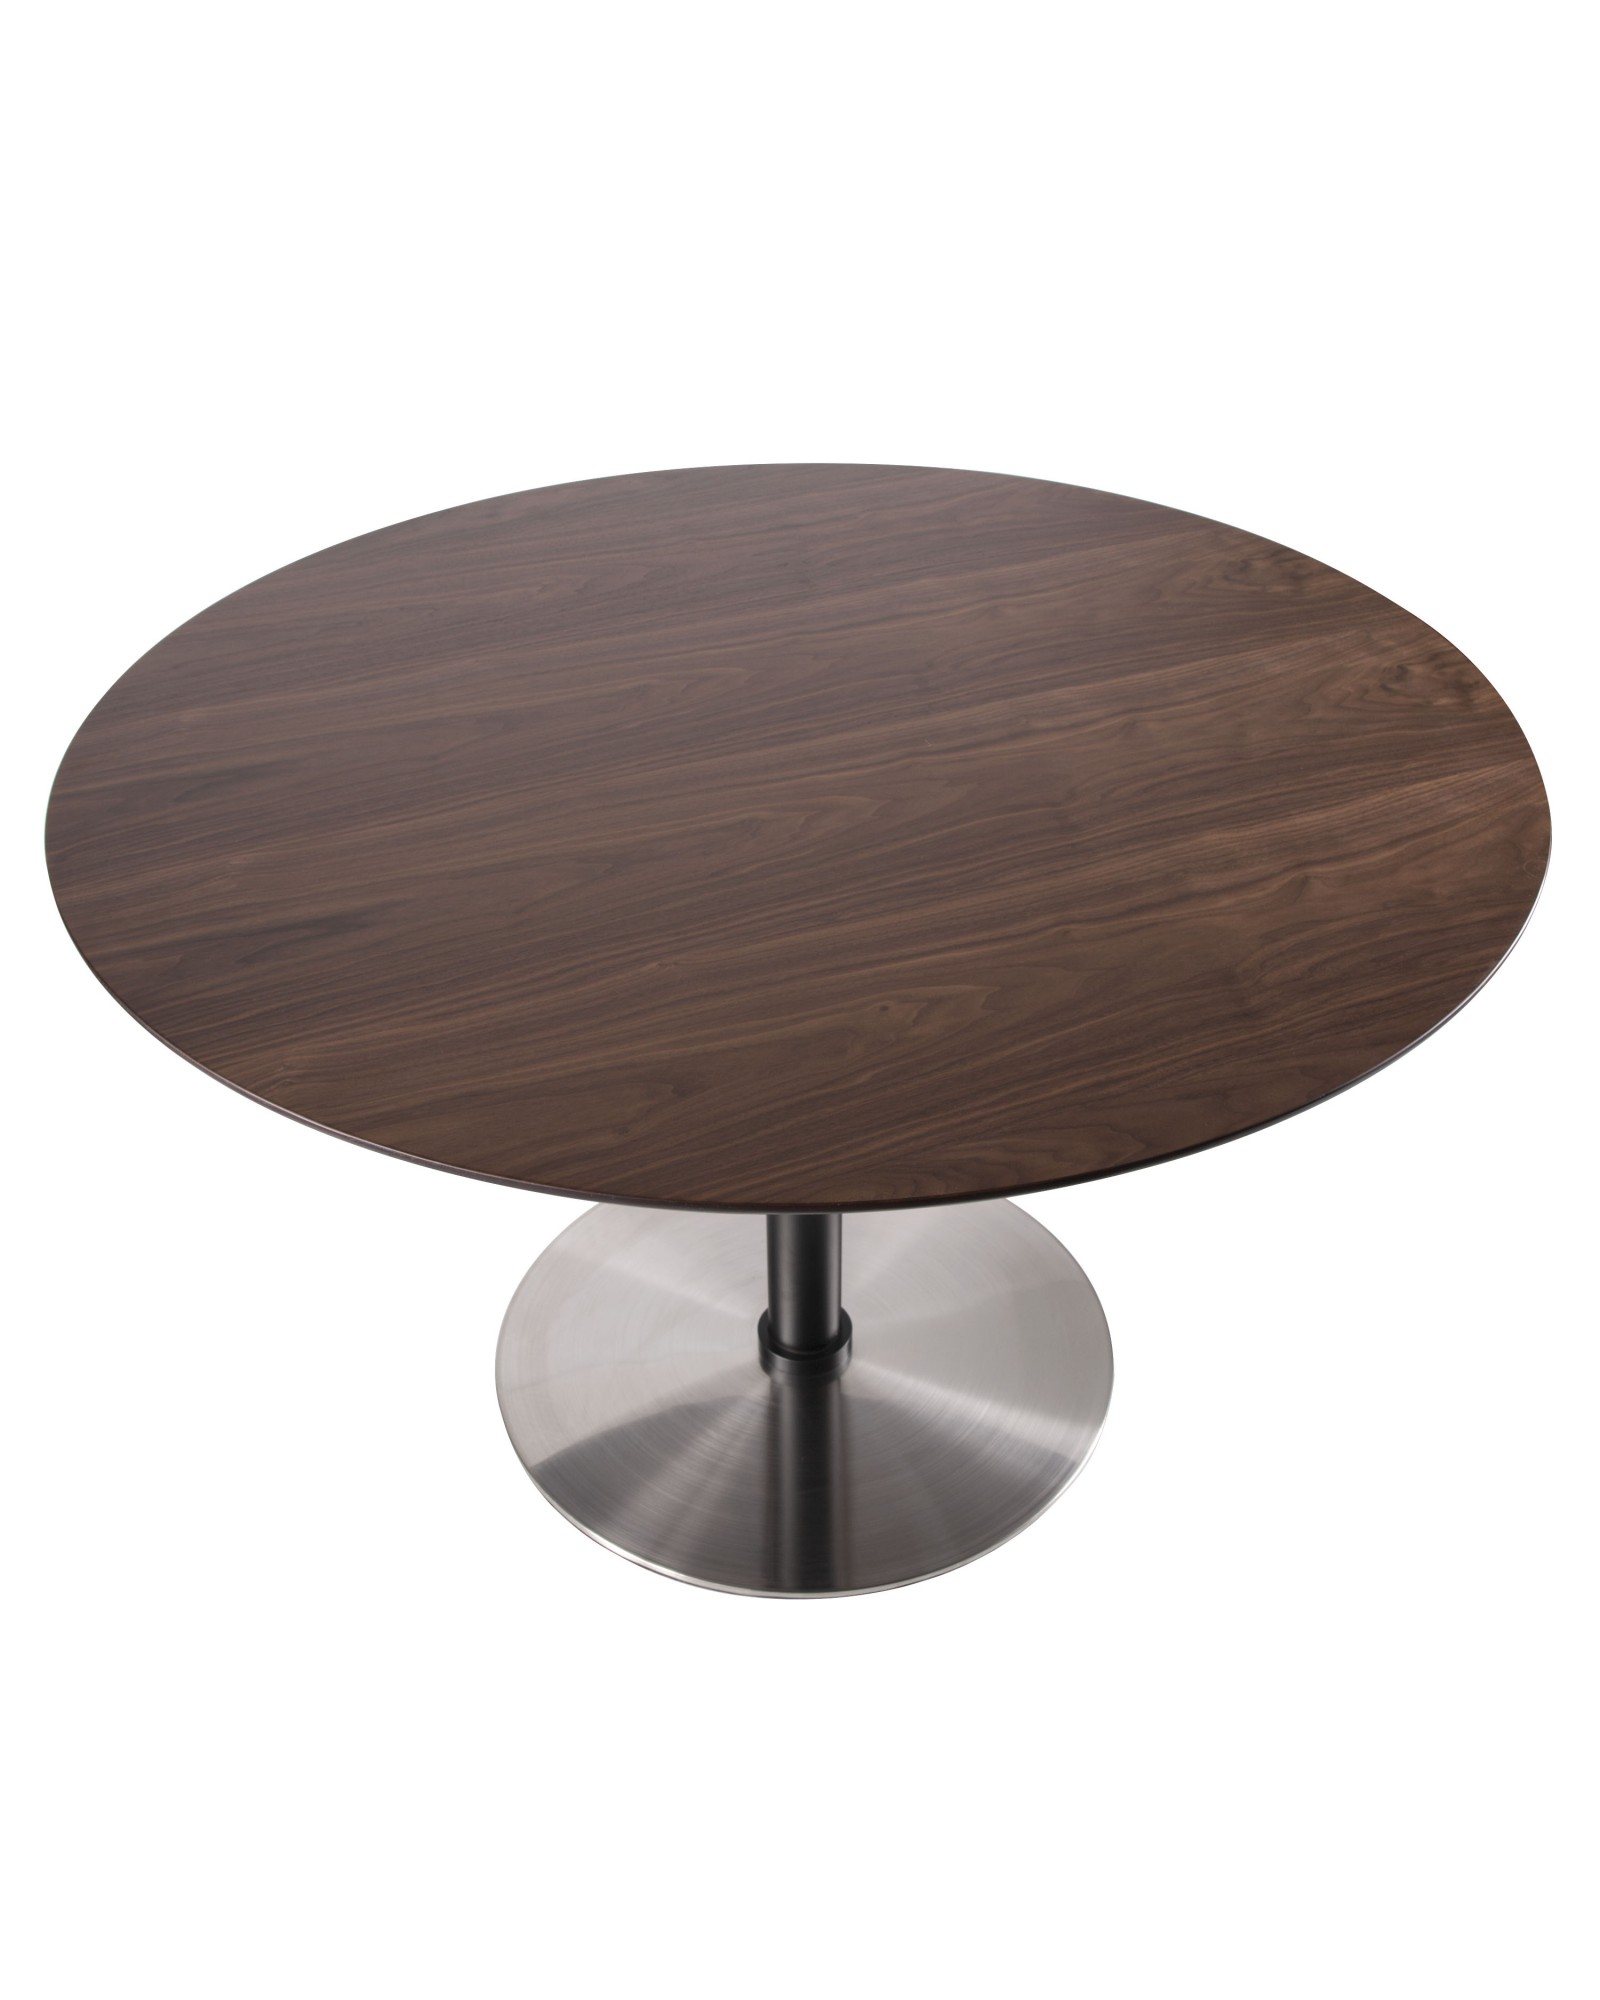 Dillon Mid-Century Modern Dining Table in Walnut and Stainless Steel